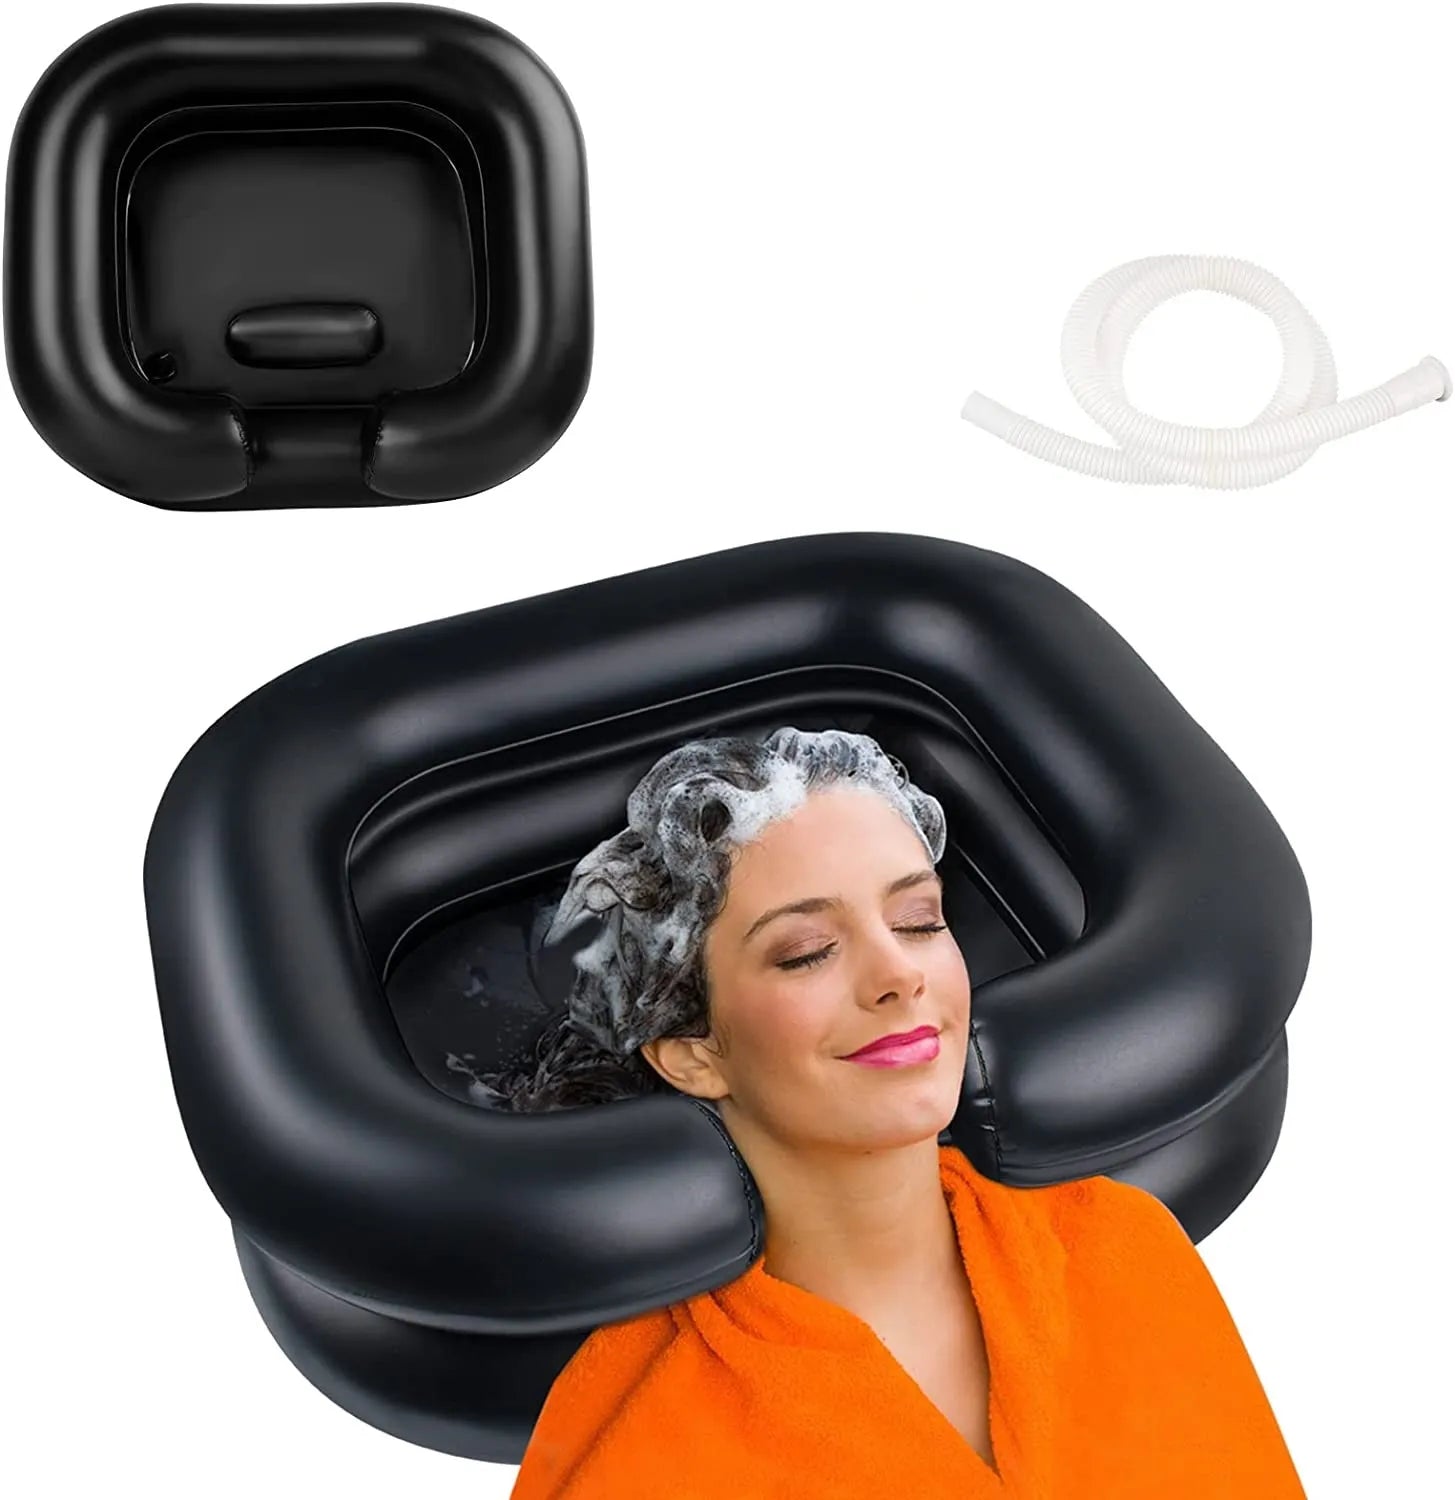 Inflatable Shampoo Basin for Bedridden, Disabled, and Injured Individuals